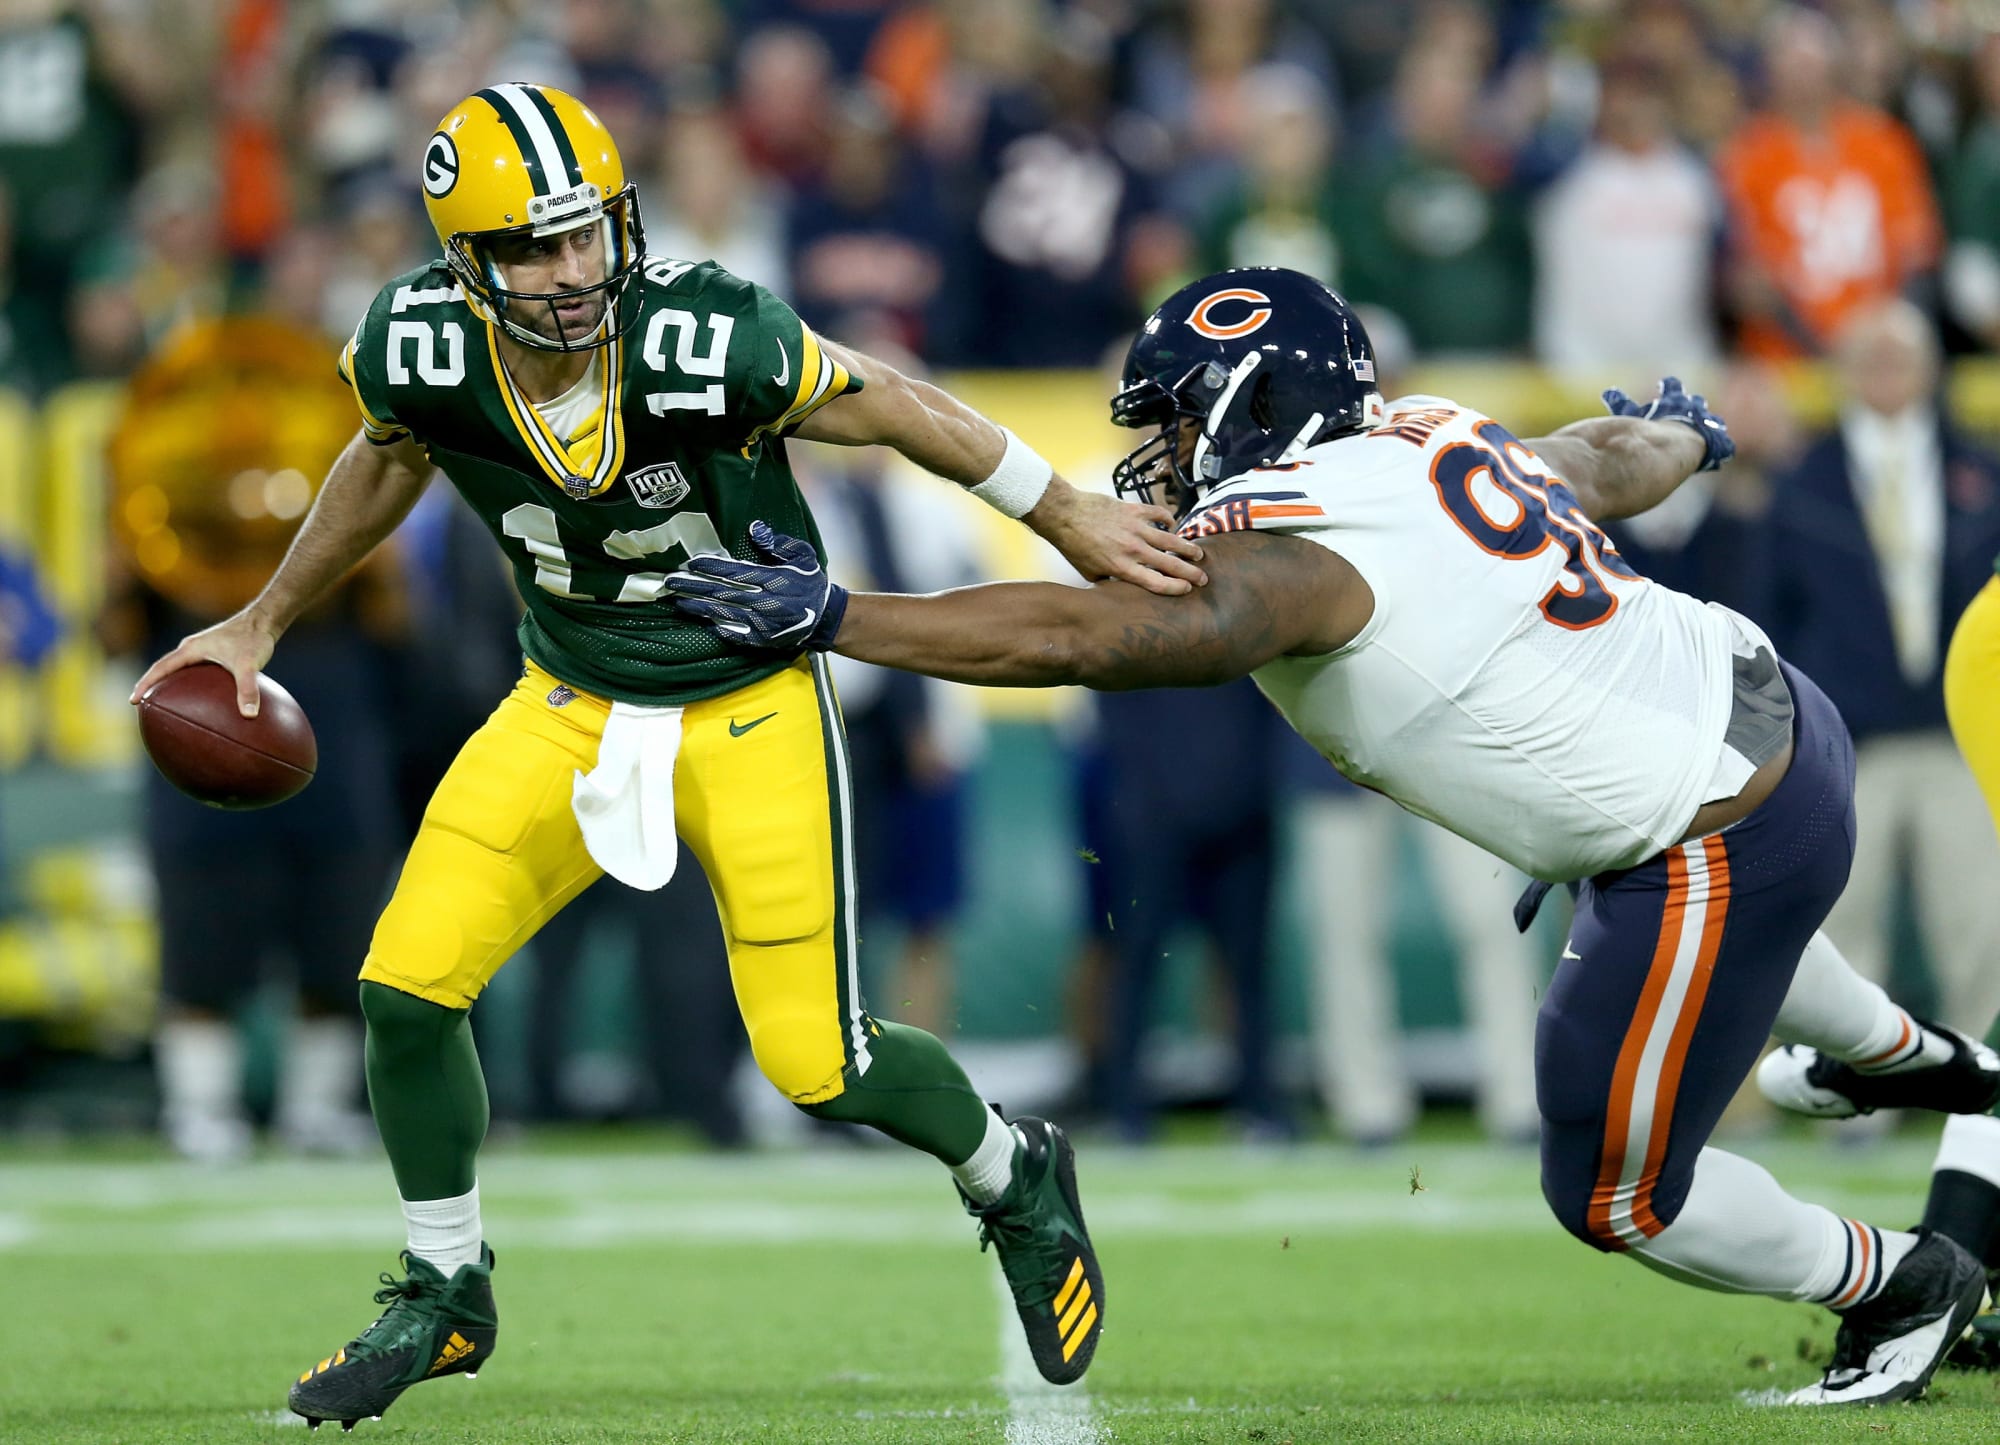 nfl live streaming free packers vs. giants